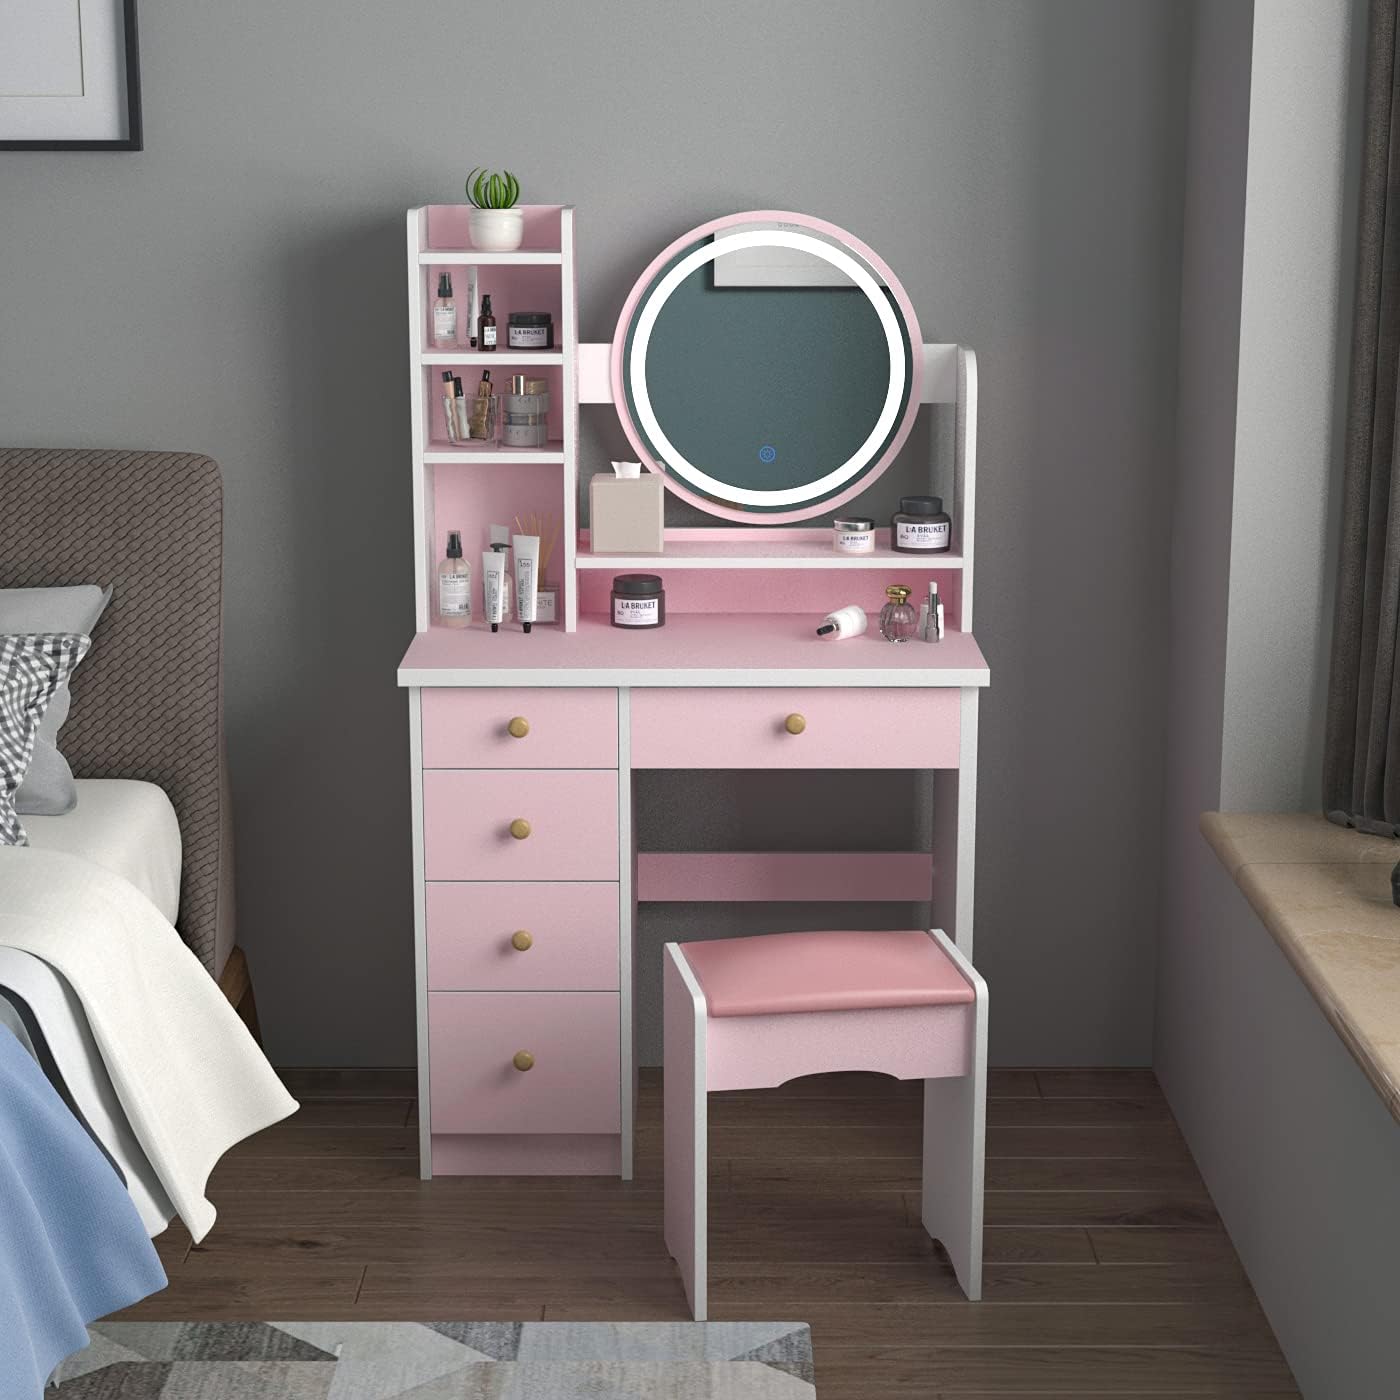 FUFU&GAGA Vanity Set with Round Mirror, Makeup Vanity Dressing Table with 5 Drawers, Shelves, Dresser Desk and Cushioned Stool Set (Pink/Lighted Mirror)